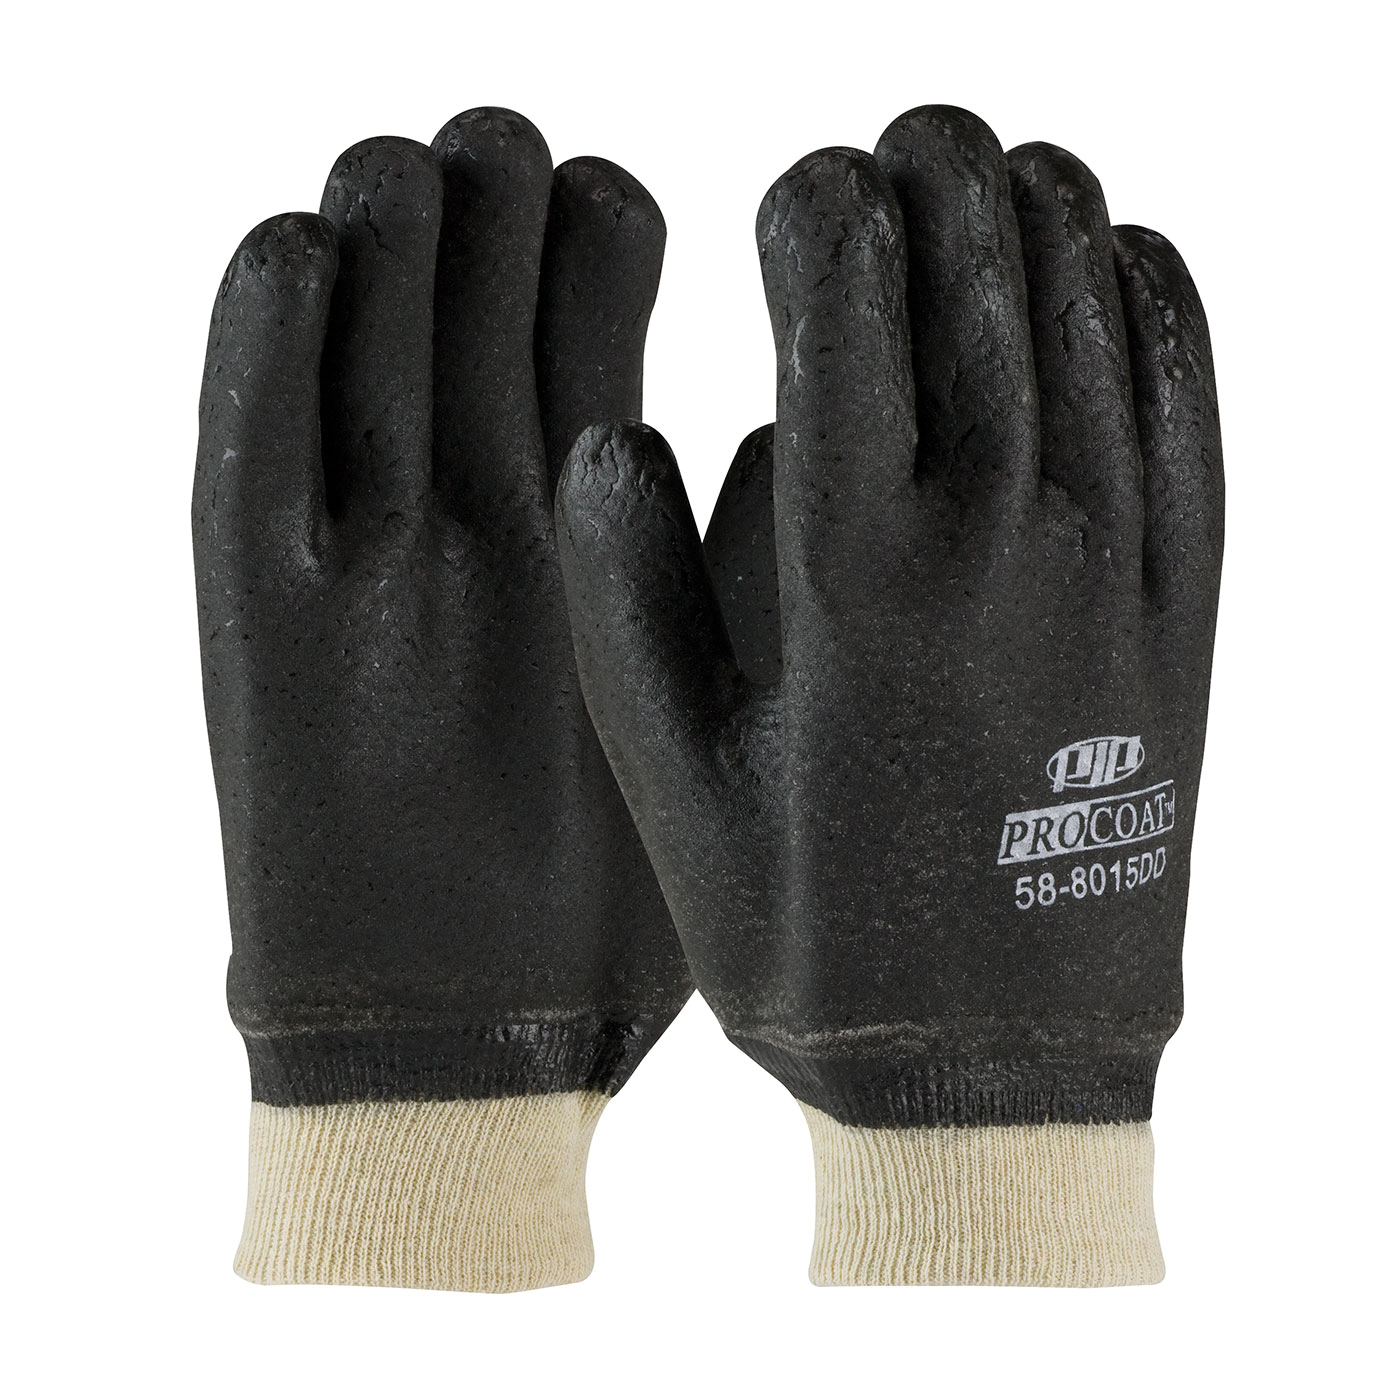 PIP® ProCoat® 58-8015DD Double Dipped Men's Chemical-Resistant Gloves, Universal, Cotton/PVC, Black, Jersey Lining, 9.8 in L, Resists: Abrasion, Cut, Puncture and Tear, Supported Support, Knit Wrist Cuff